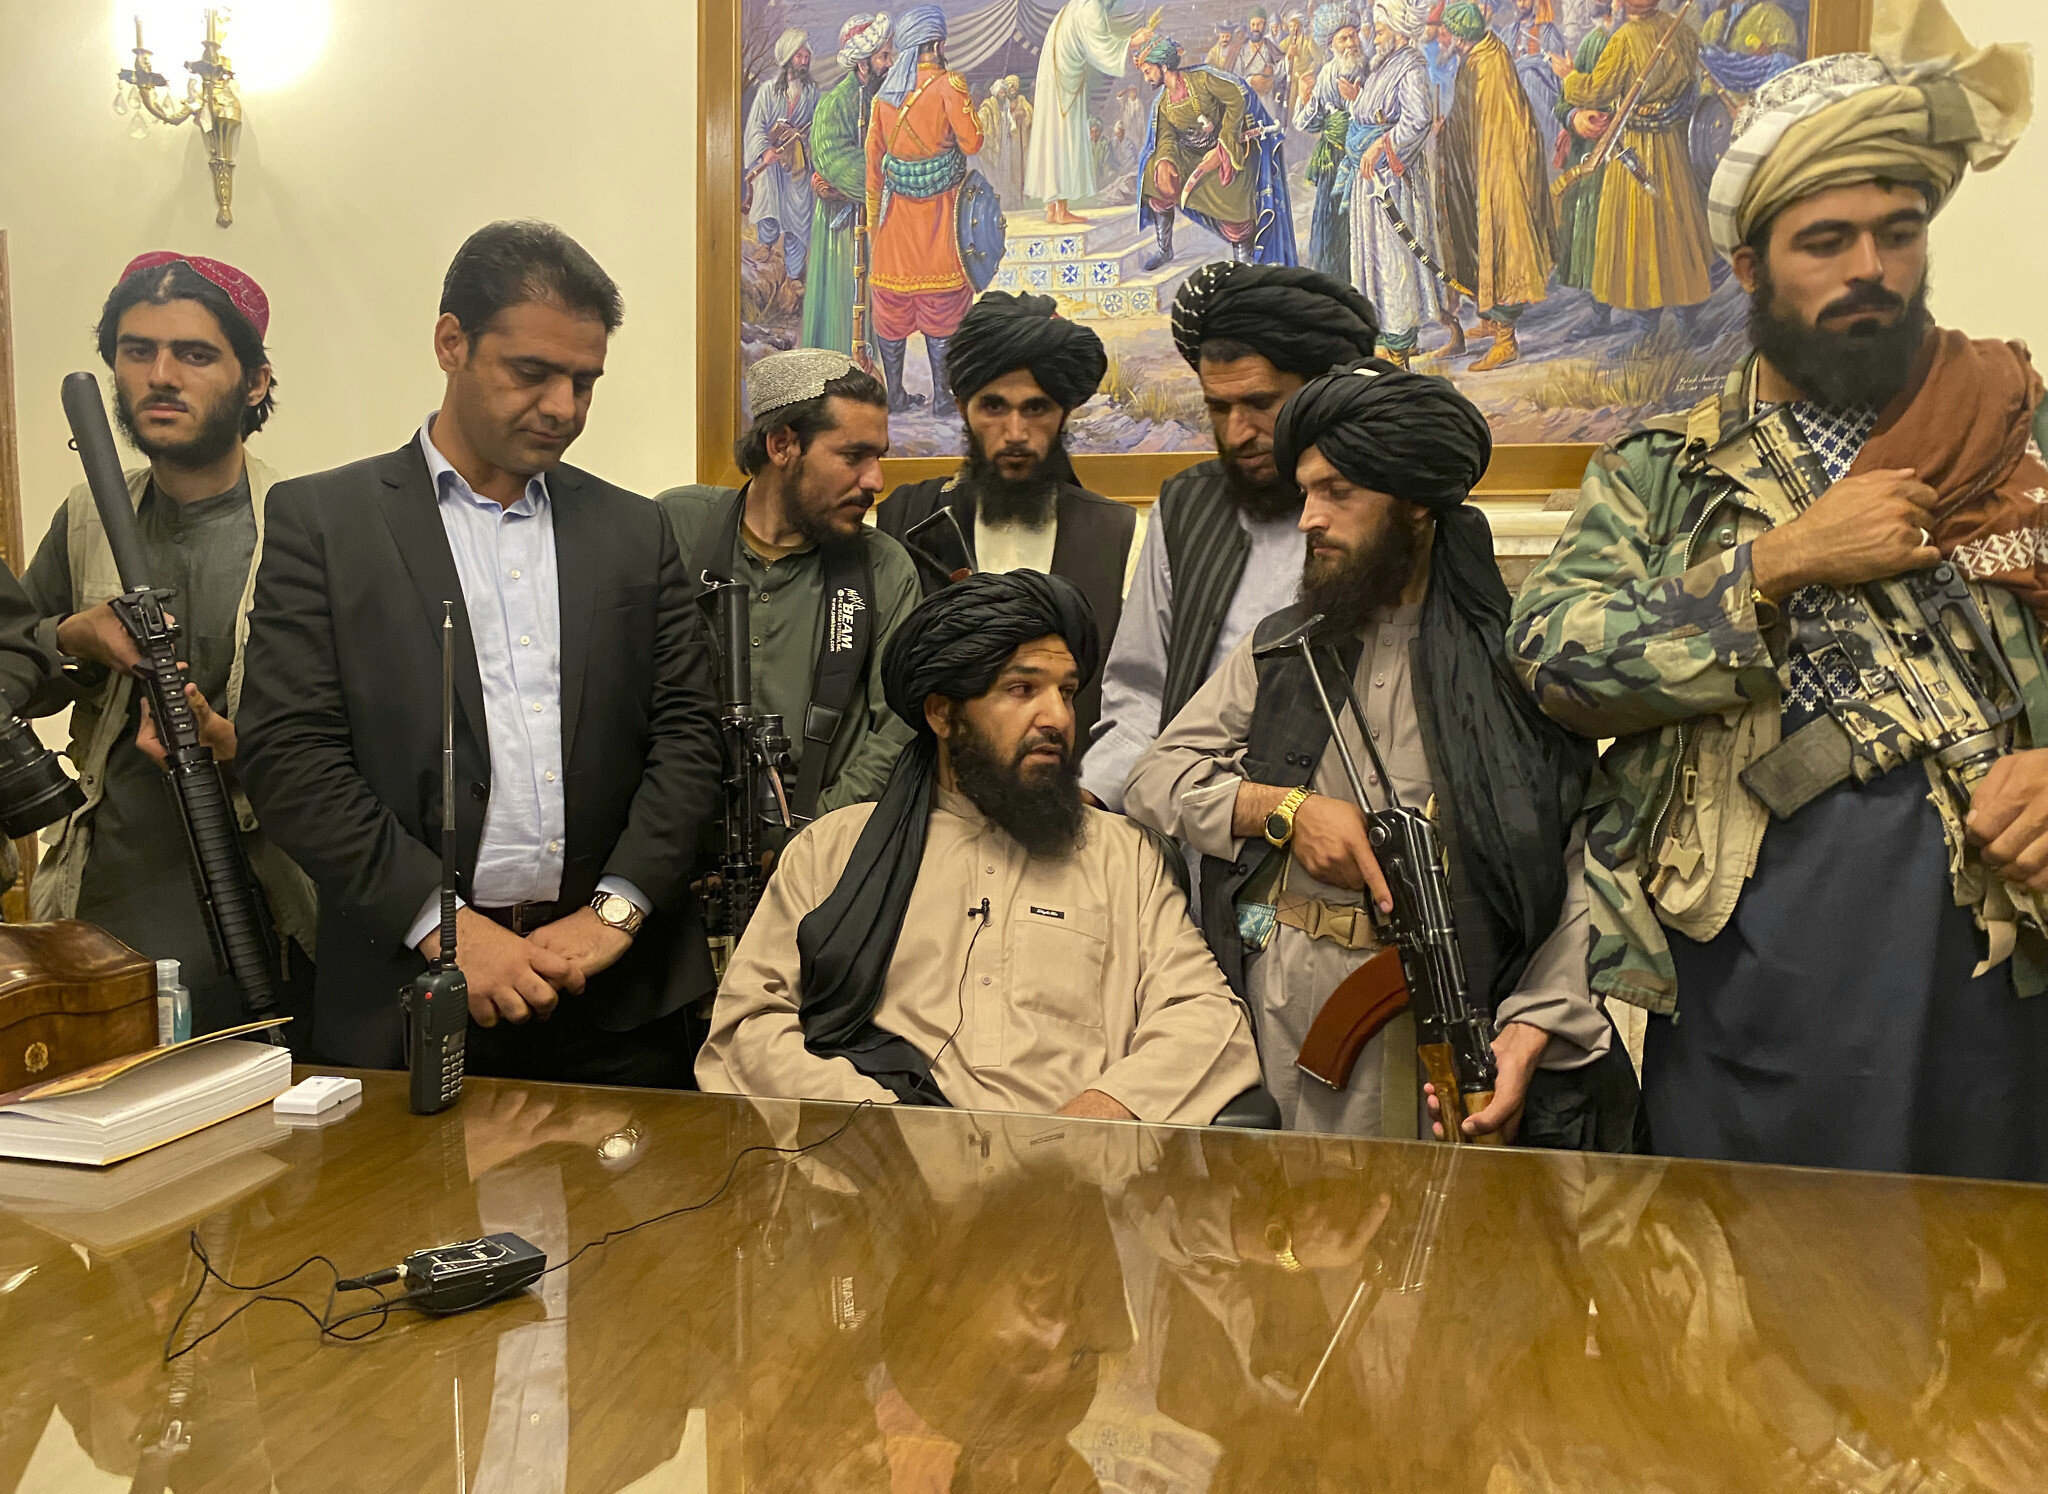 In 7day march to power, Taliban scored stunning string of victories